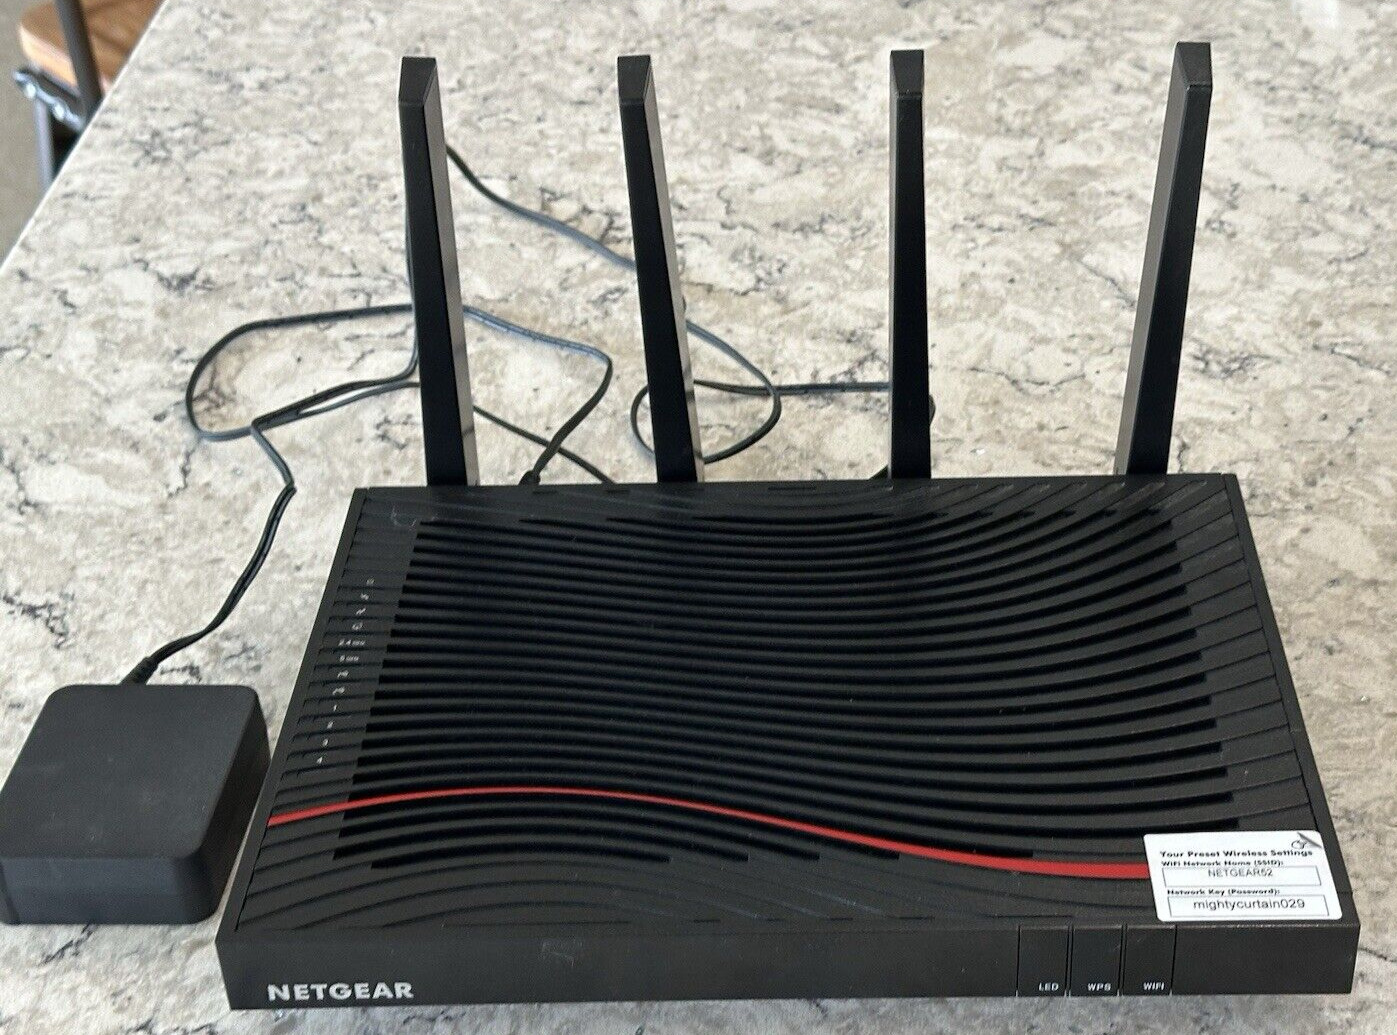 NETGEAR Nighthawk X4S AC3200 Wi-Fi Router with DOCSIS 3.0 Cable Modem C7800